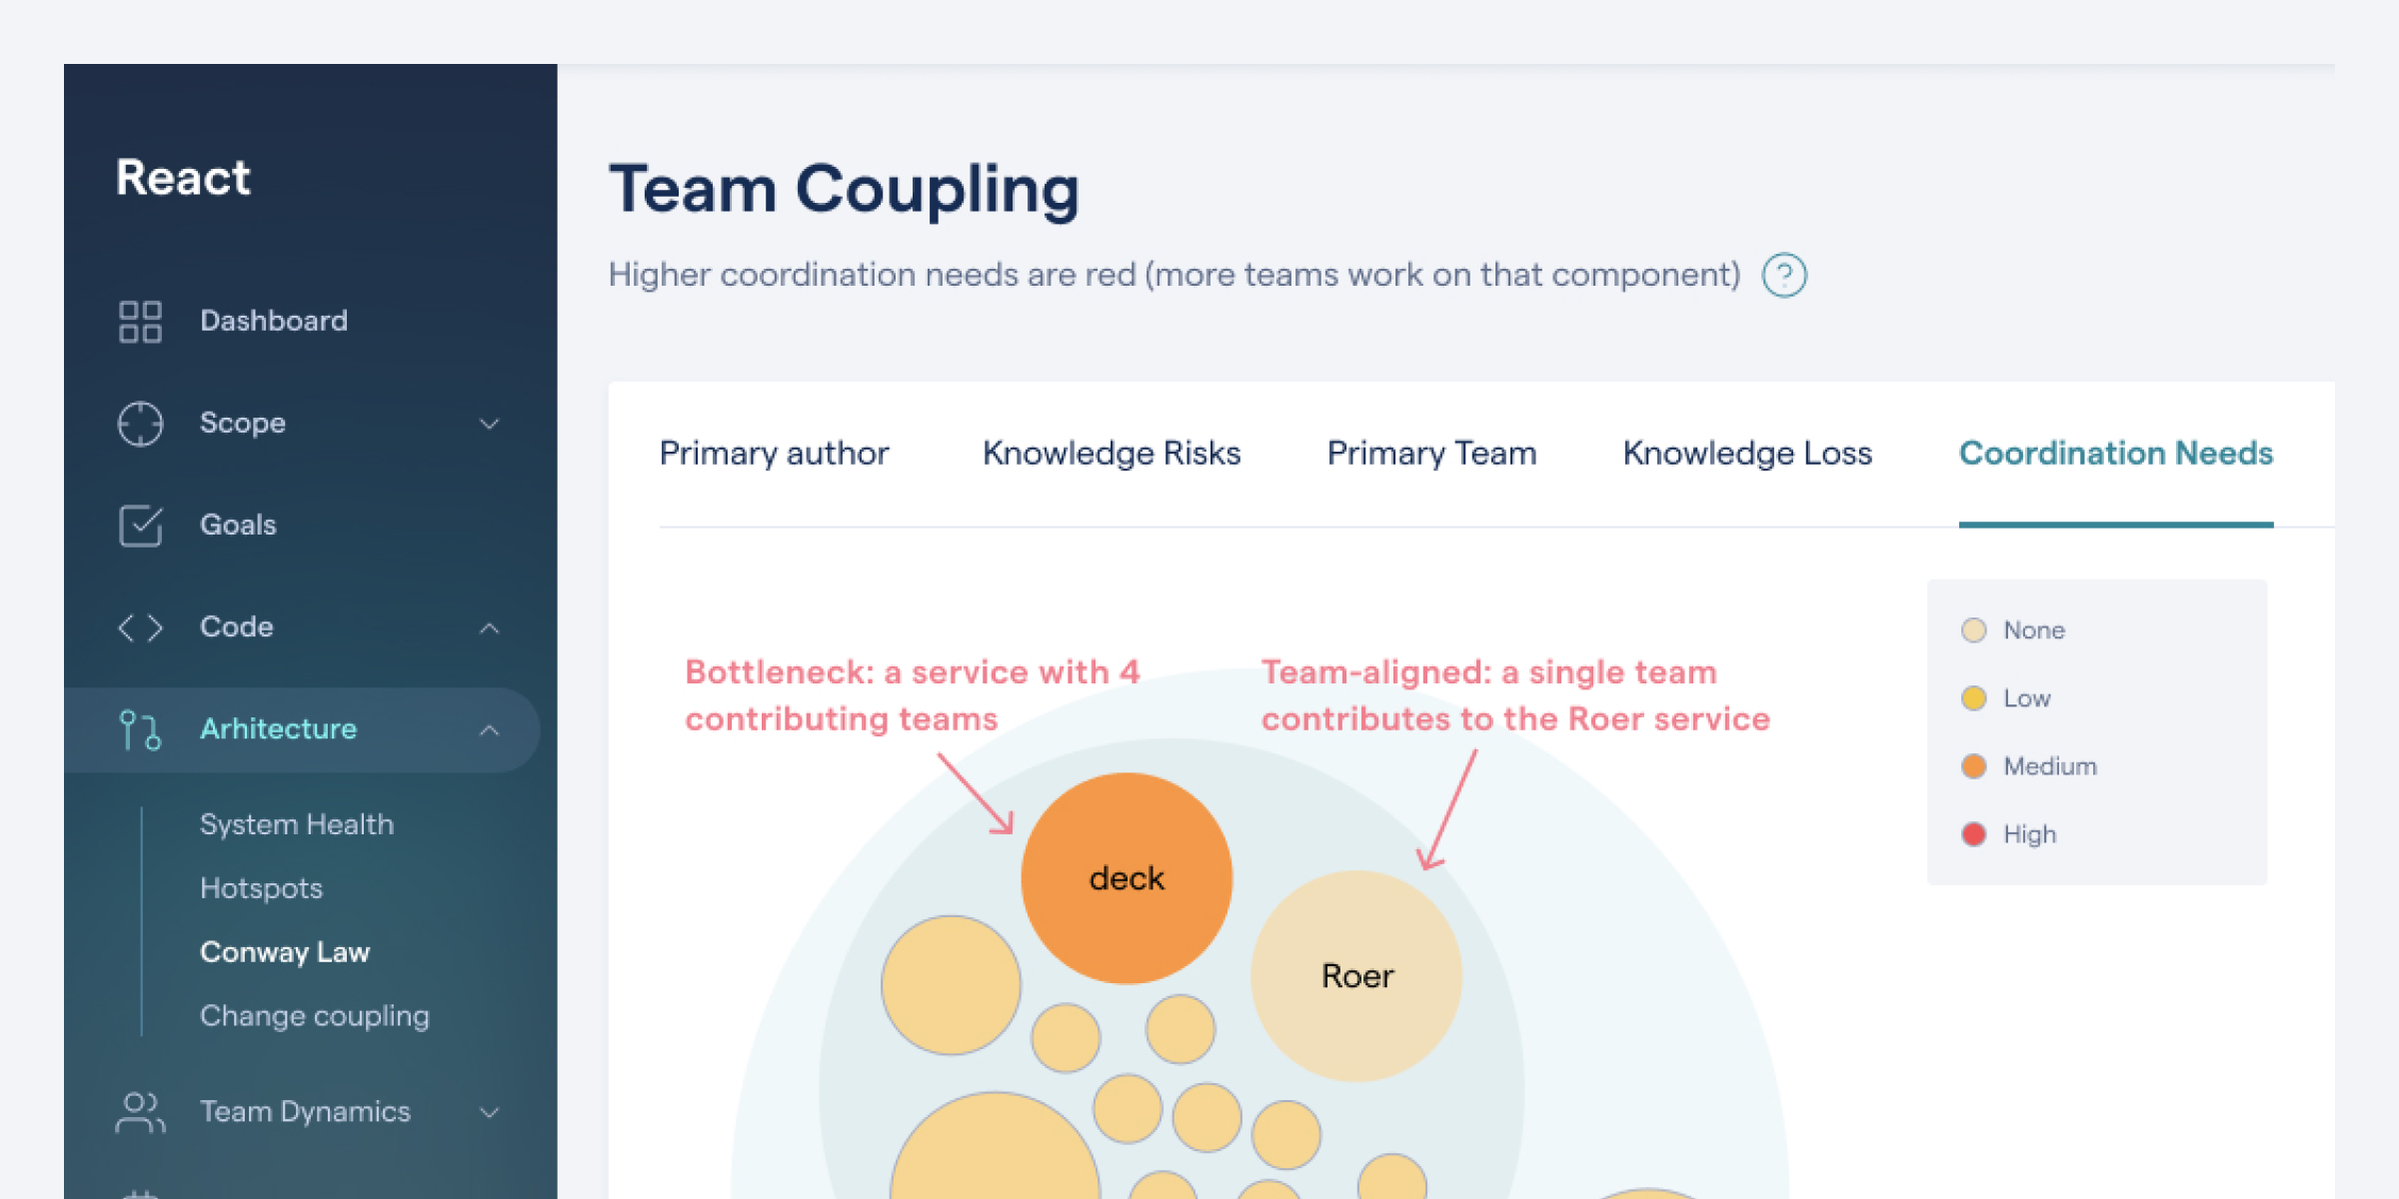 A graph showing how to find team coordination bottlenecks based on code contributions: the redder, the more team coupling.